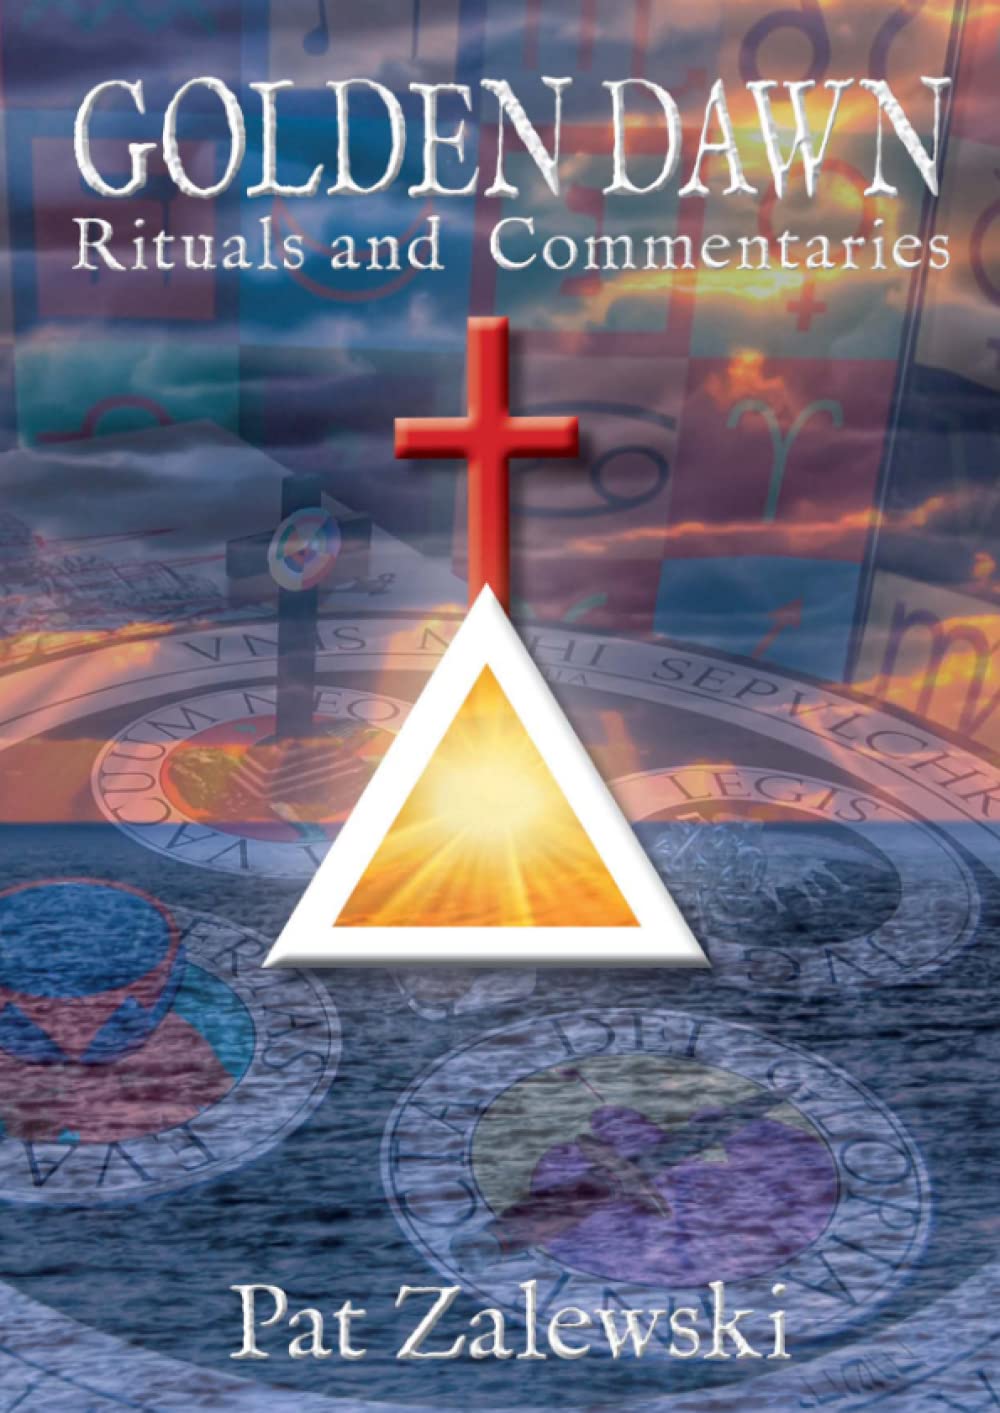 Golden Dawn Rituals and Commentaries